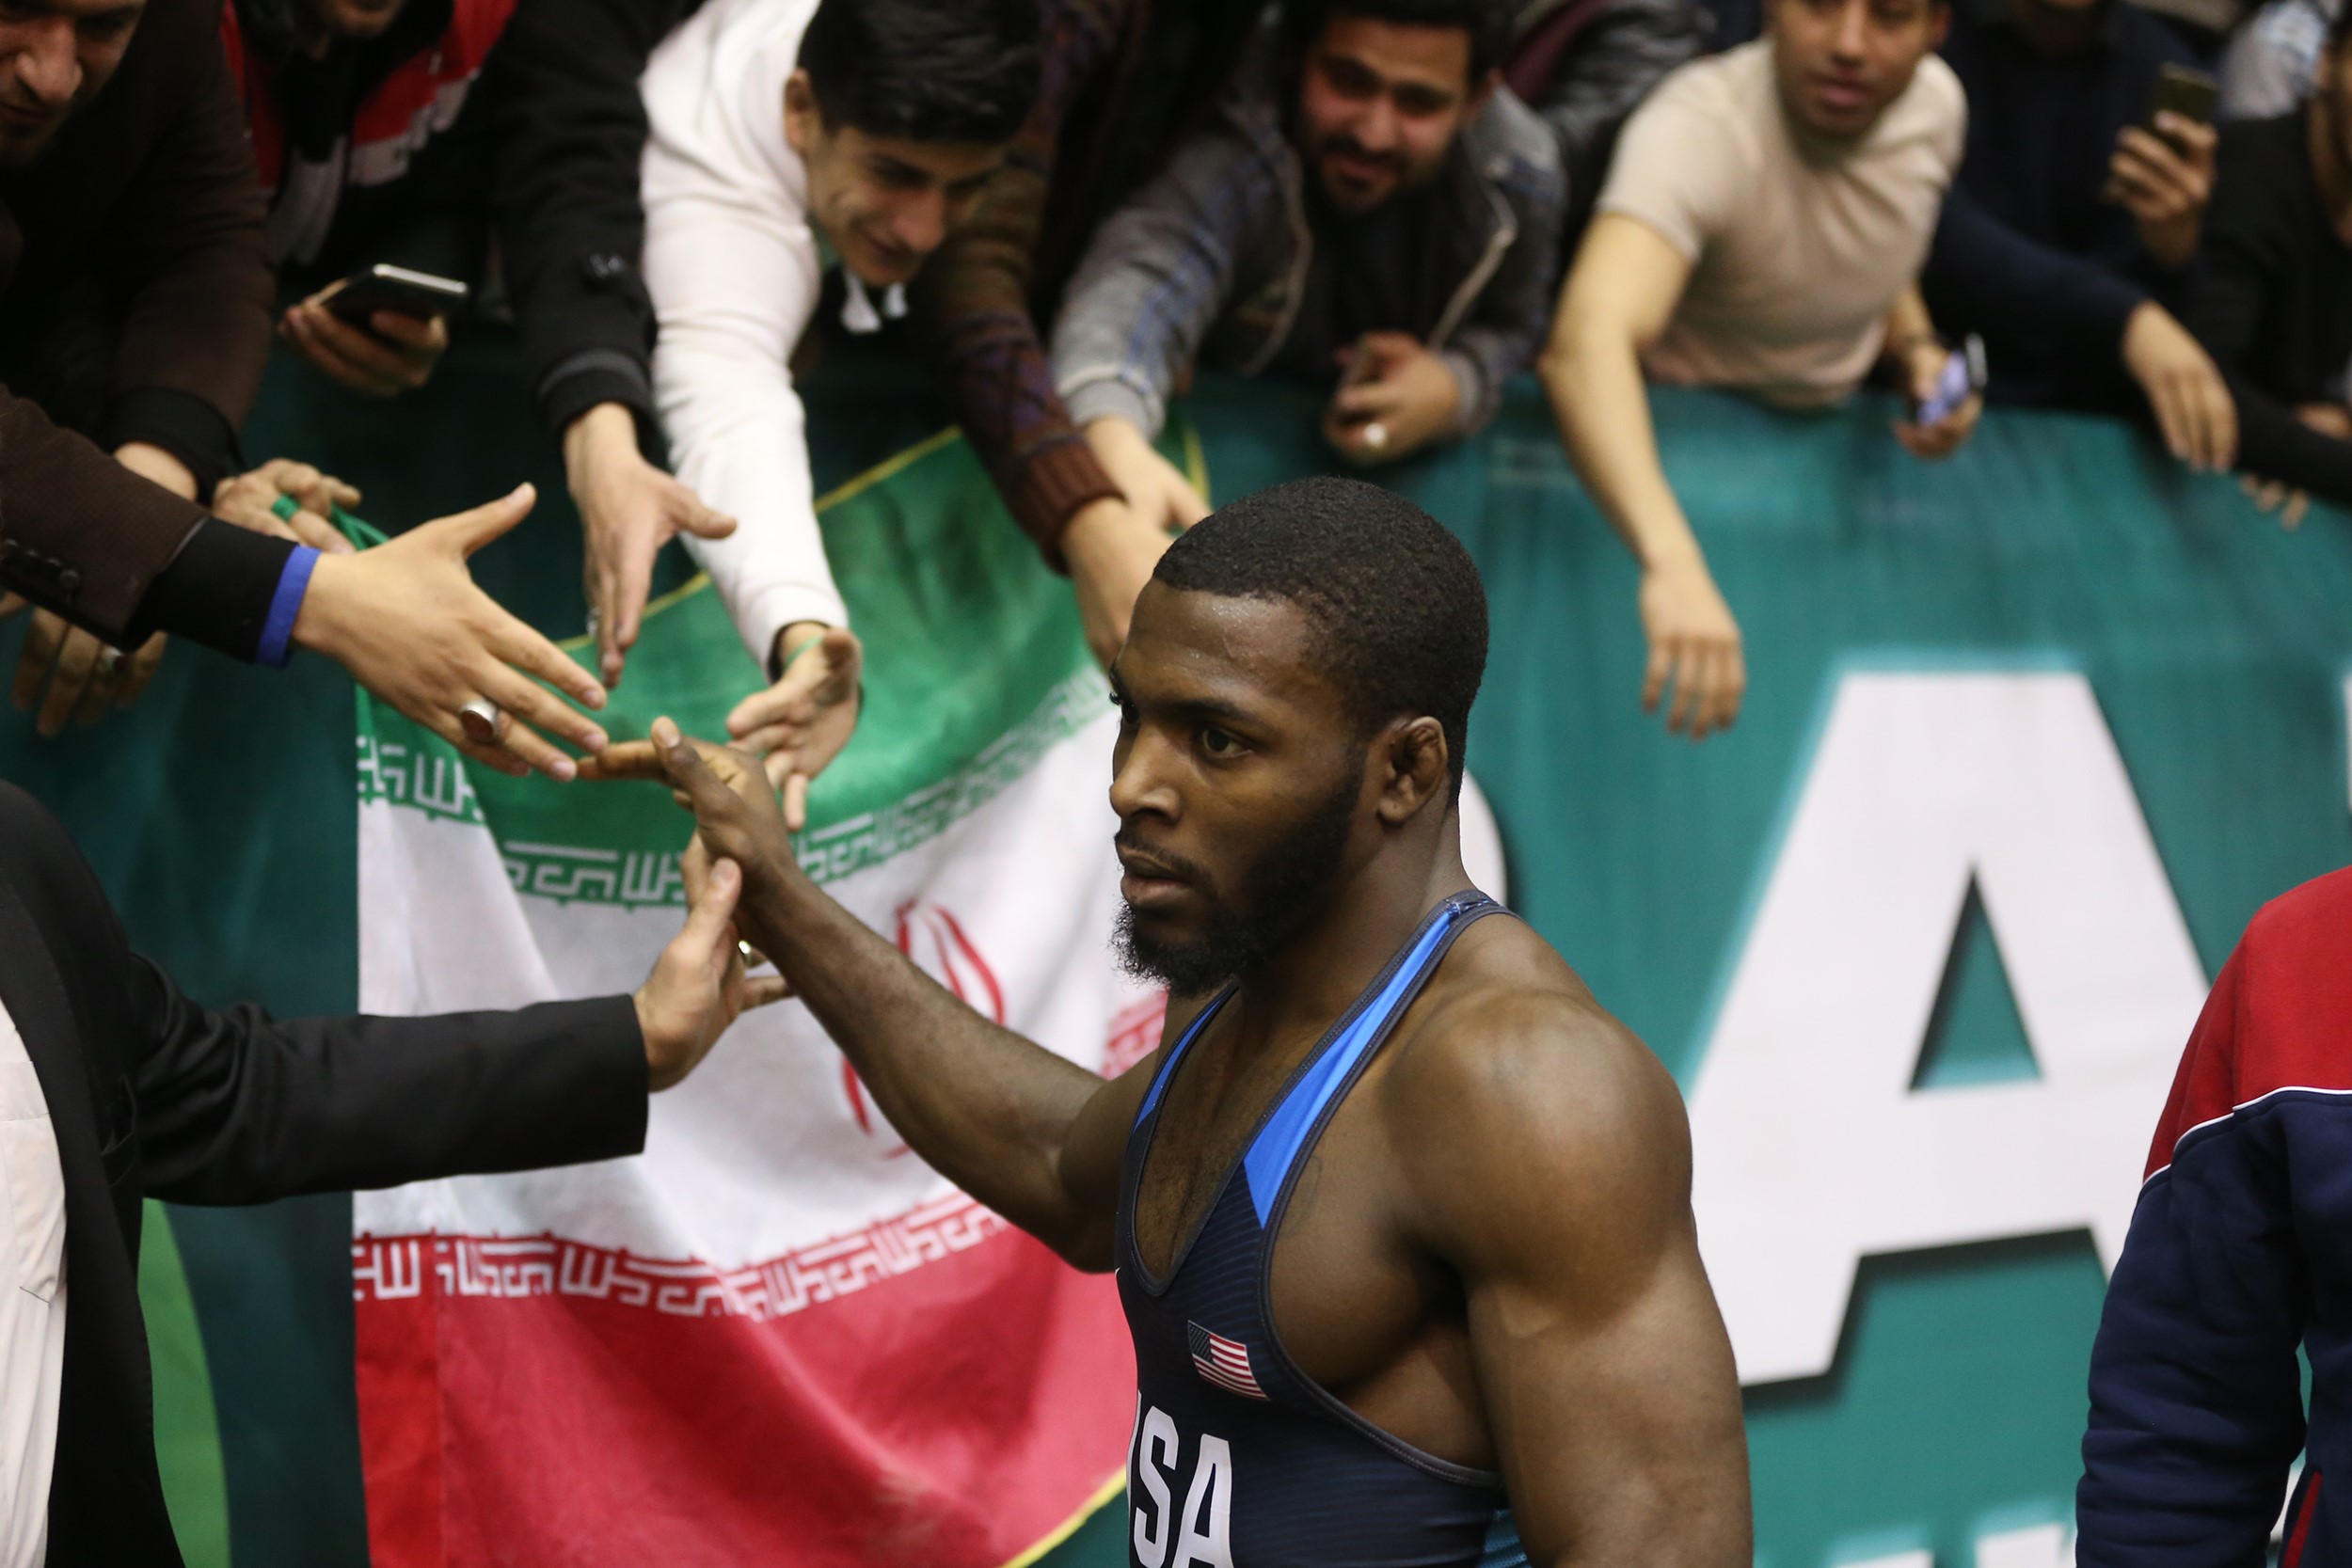 Freestyle World Cup 2017 in Iran